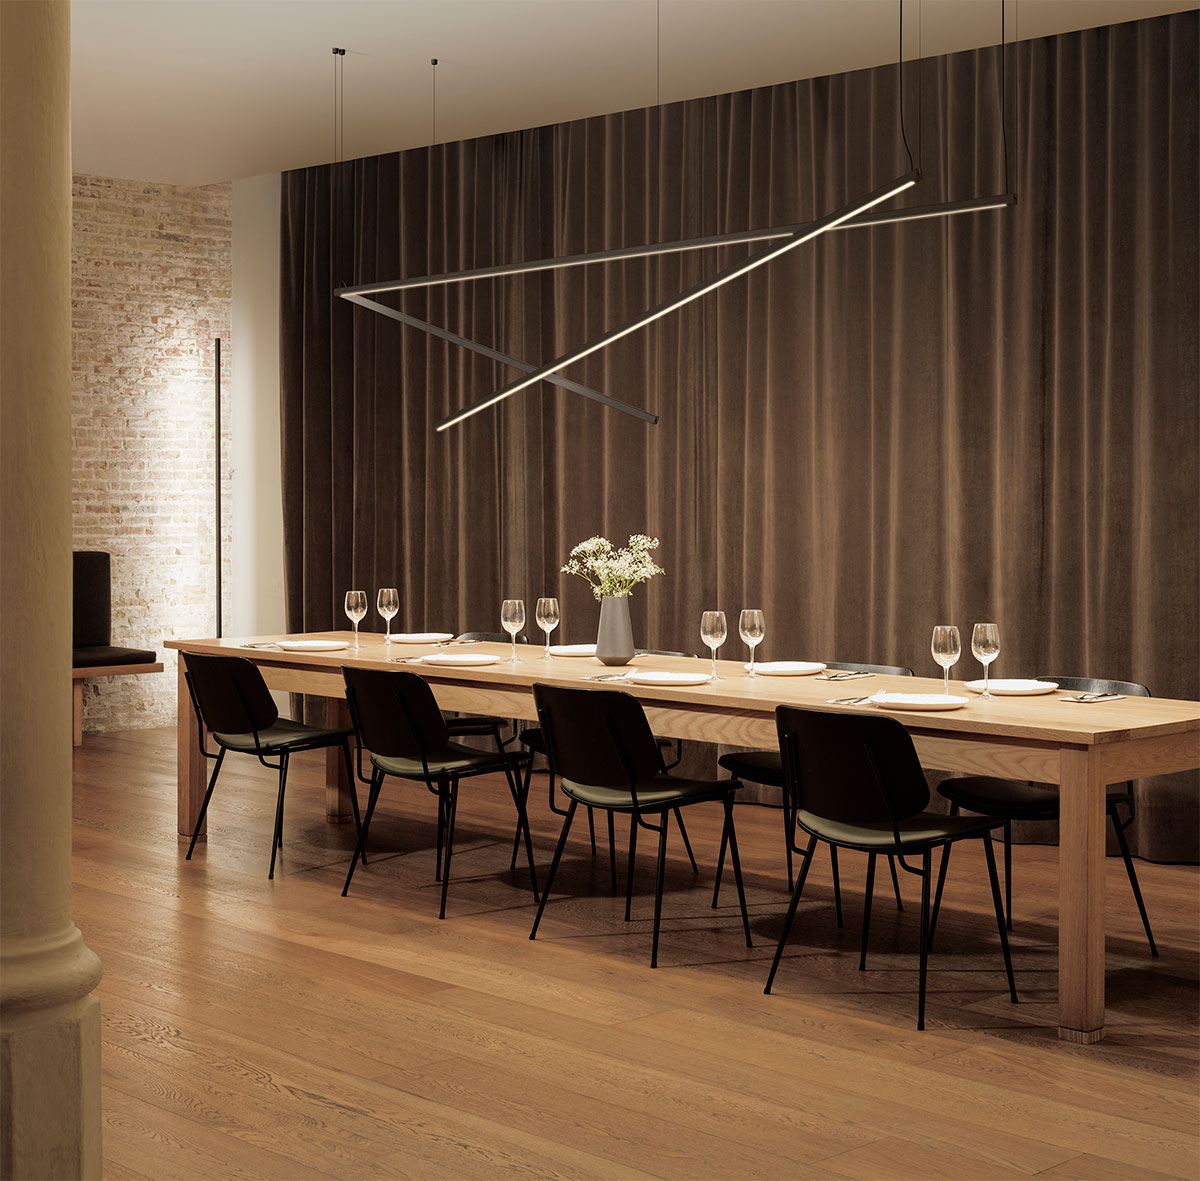 Vibia The Edit - Introducing the Sticks collection - Boundless Spaces